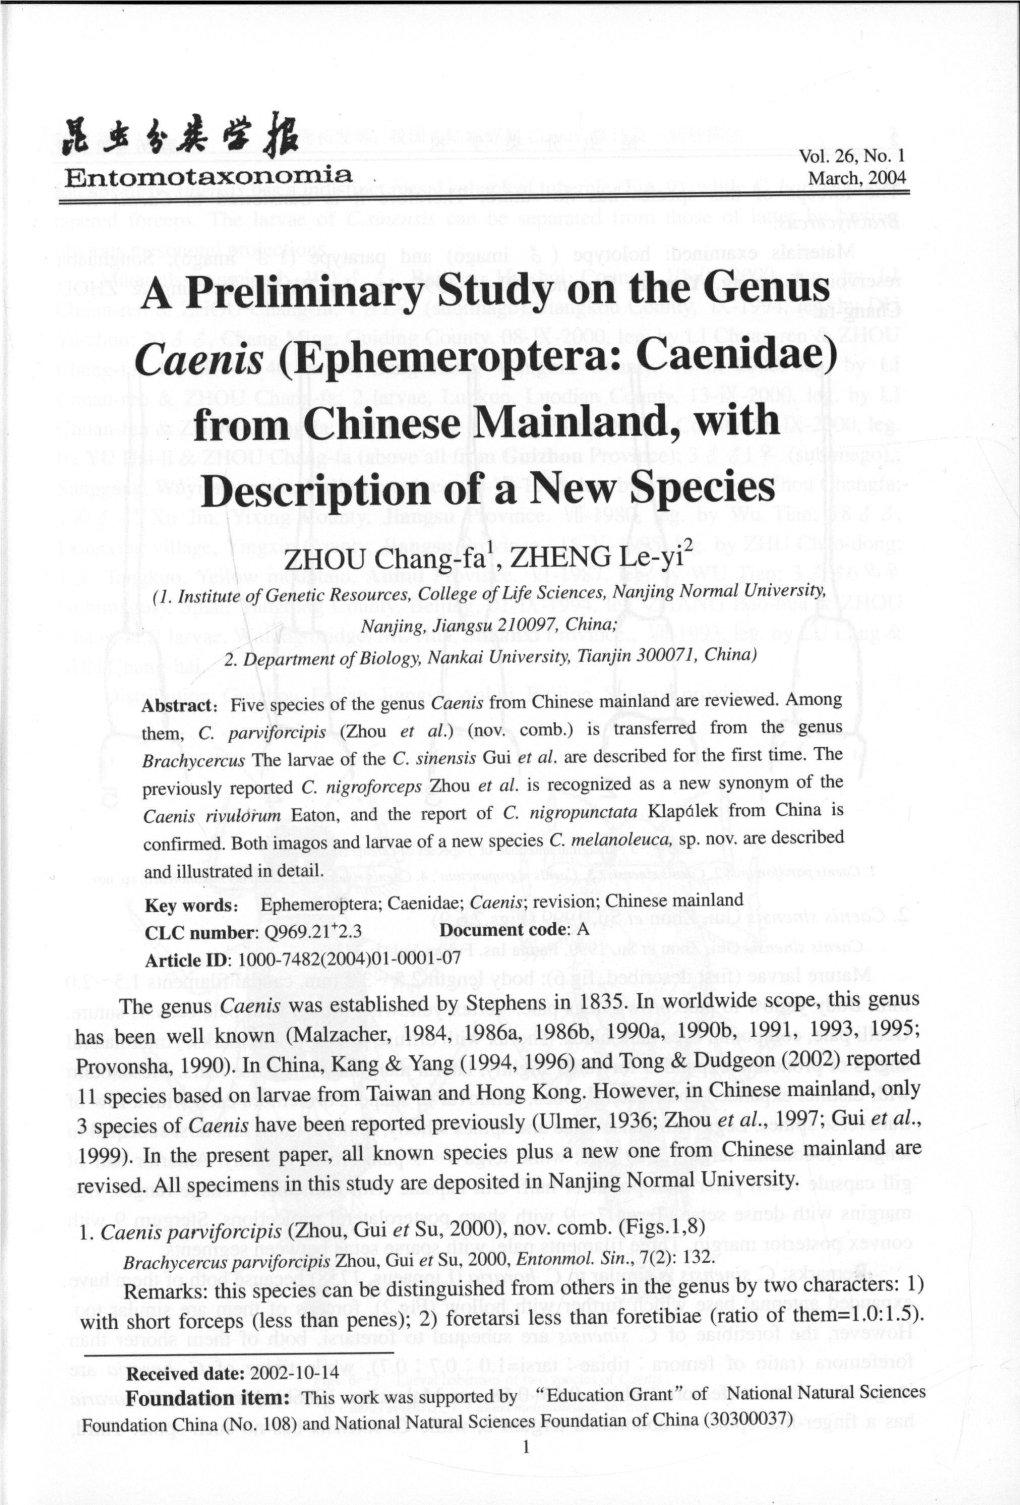 A Preliminary Study on the Genus Caenis (Ephemeroptera: Caenidae) from Chinese Mainland, with Description of a New Species